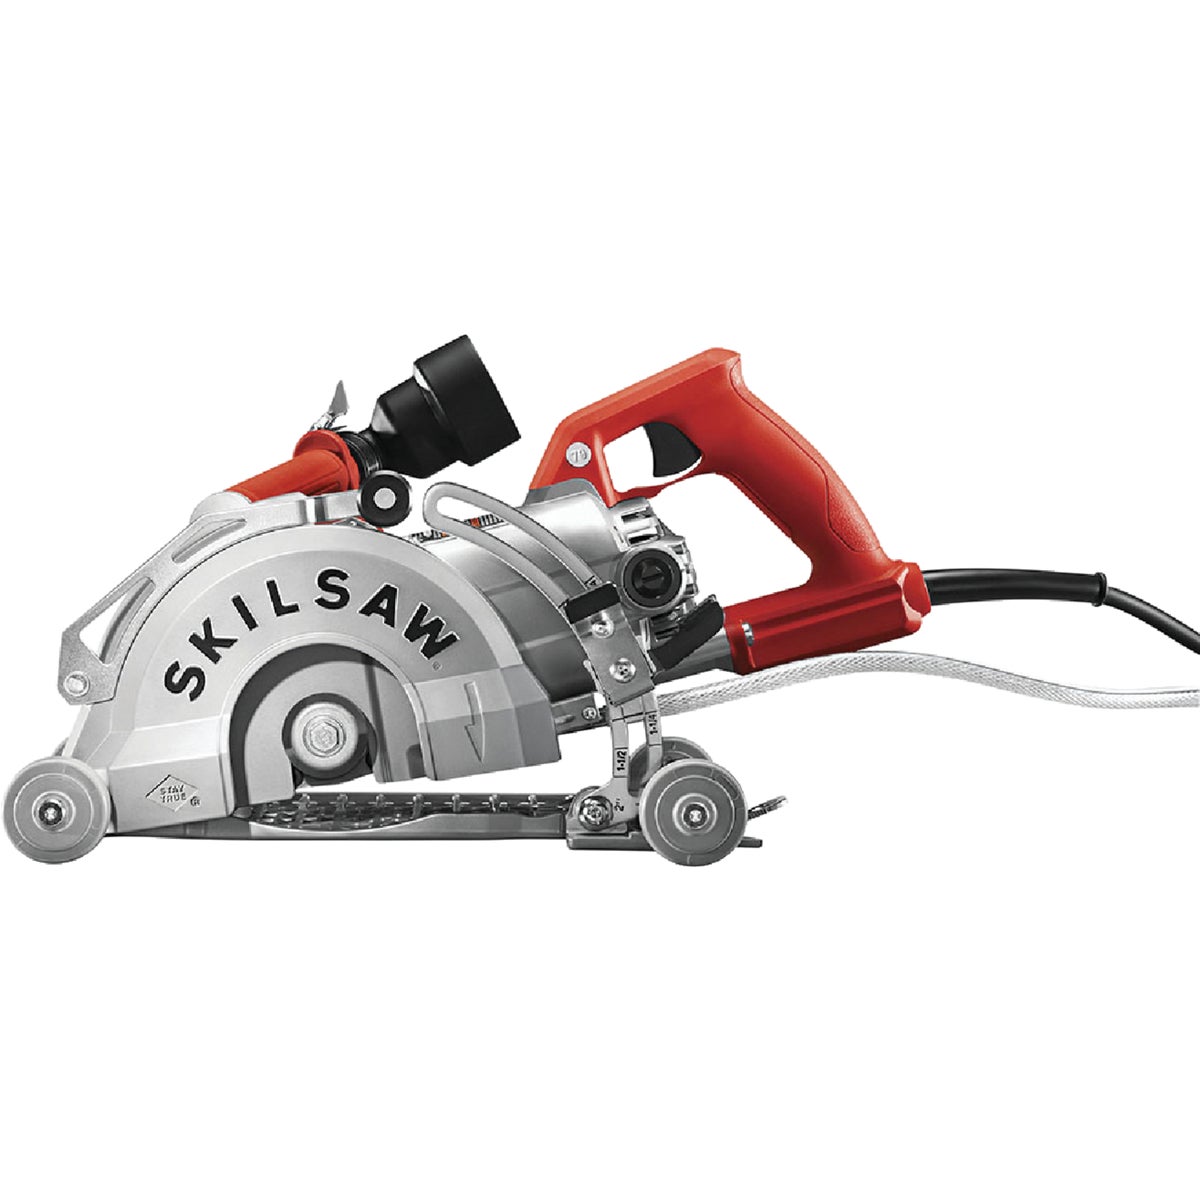 Item 302744, Worm drive concrete saw delivers a complete concrete cutting system with 